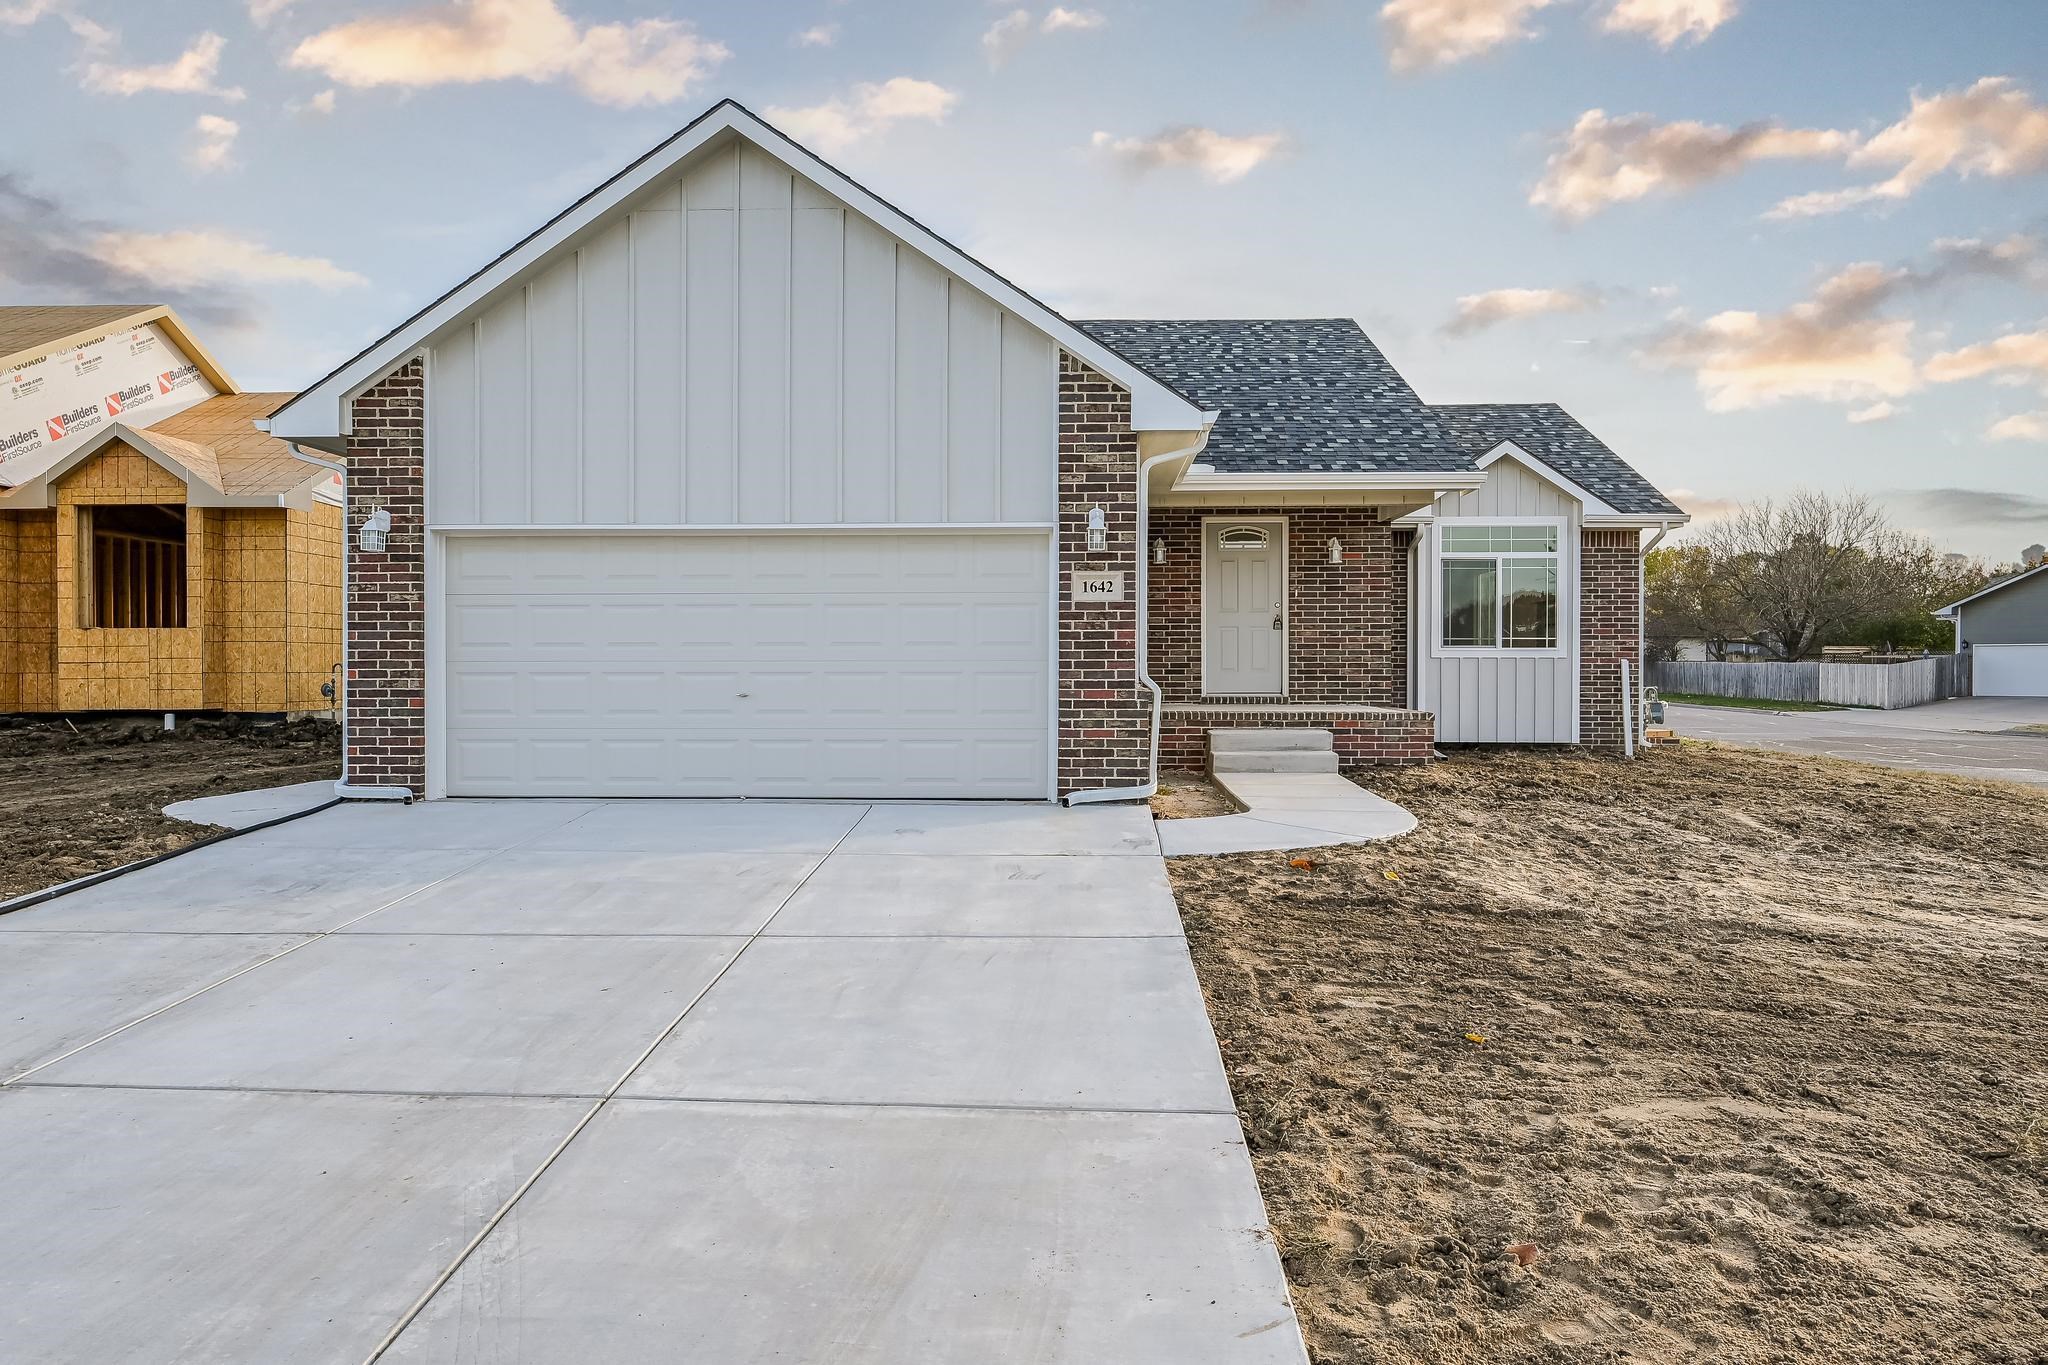 Brand new built home in Southeast Wichita. 4 bedroom, 3 bath,  2 attached car garage, covered deck, 